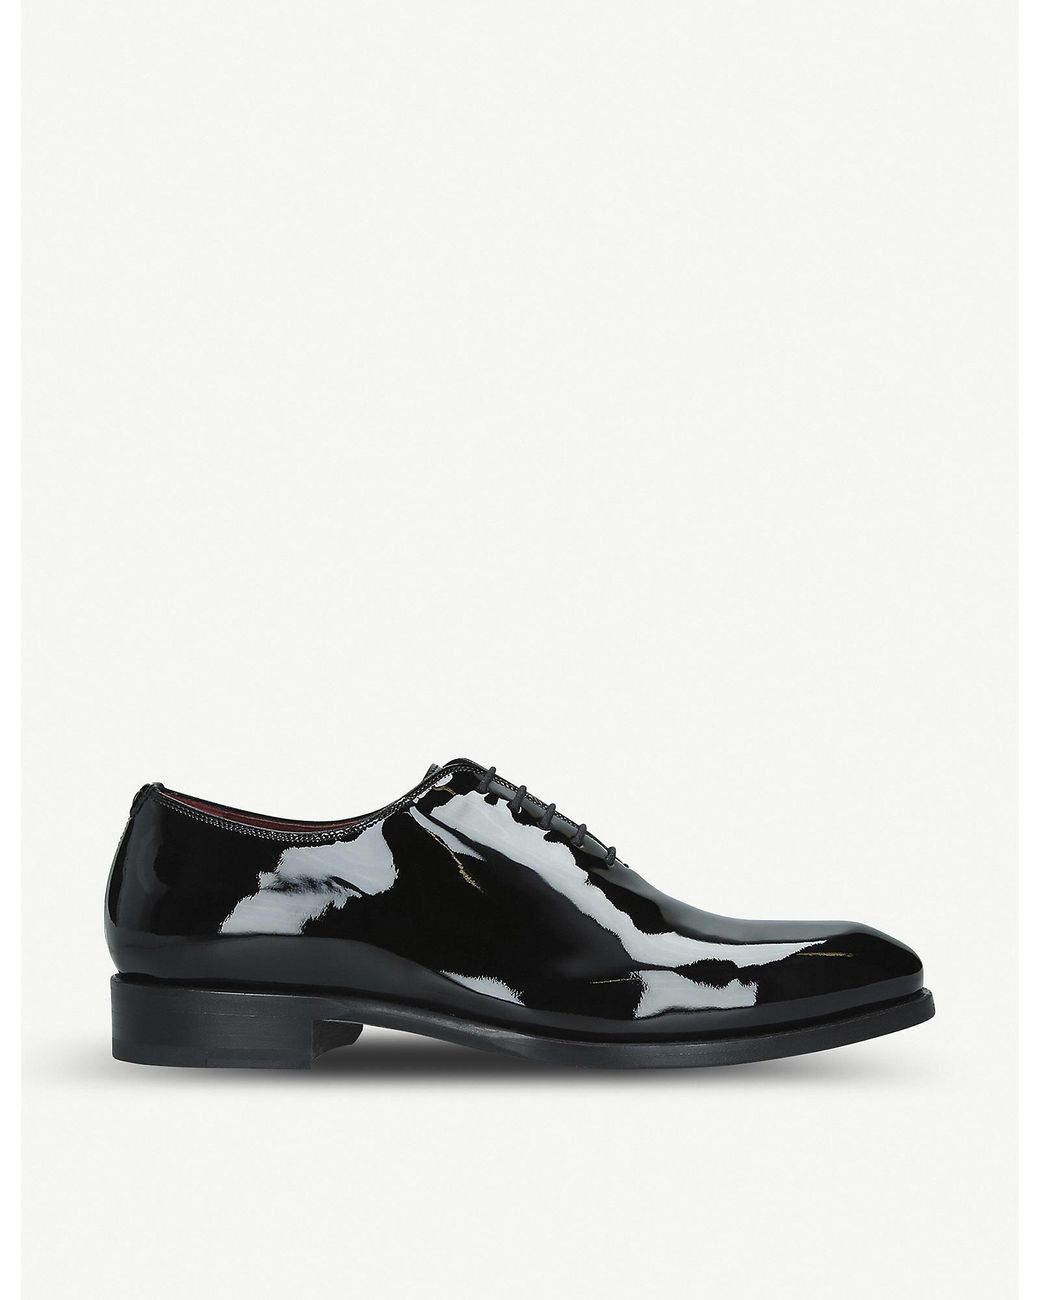 Magnanni Wholecut Patent Leather Oxford Shoes in Black for Men | Lyst